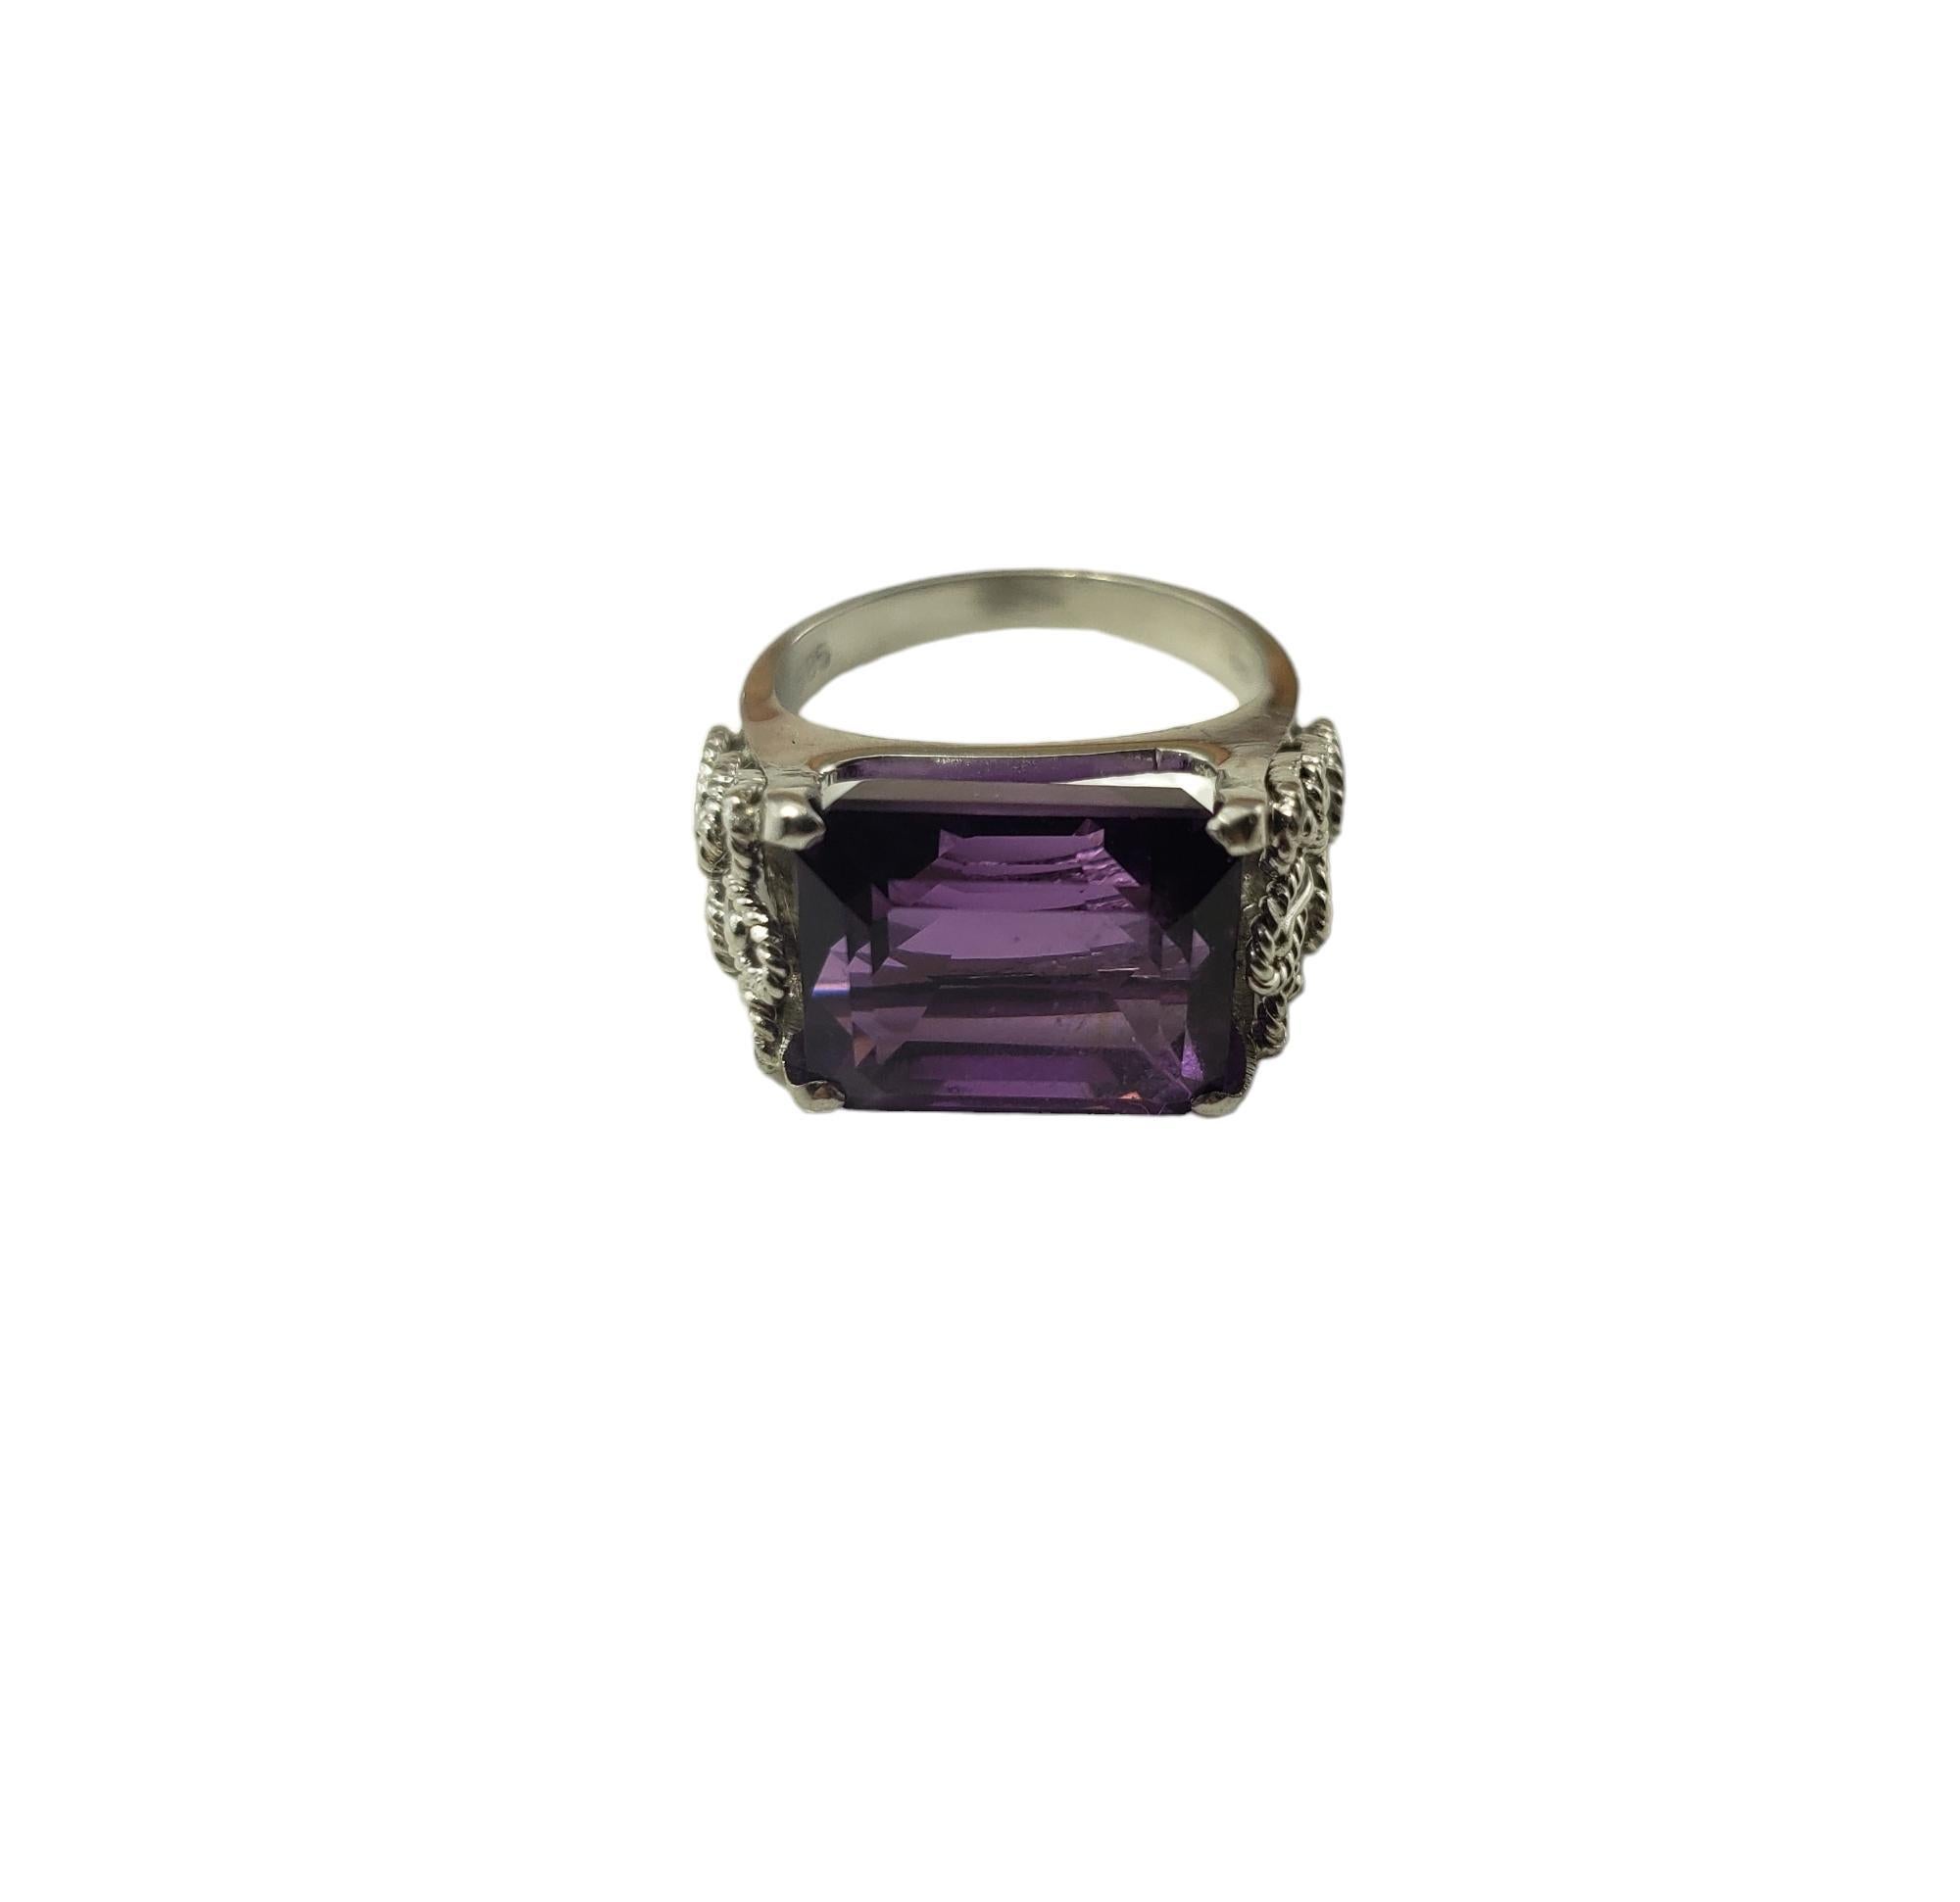 Vintage 14K White Gold Amethyst Ring size 6.75 JAGi Certifed-

This elegant ring features one emerald cut amethyst  (12.9 mm x 10.5 mm) set in beautifully detailed 14K white gold.  Shank: 2.4 mm.

Ring size: 6.75

Stamped: 585 14K

Weight: 8.0 gr./